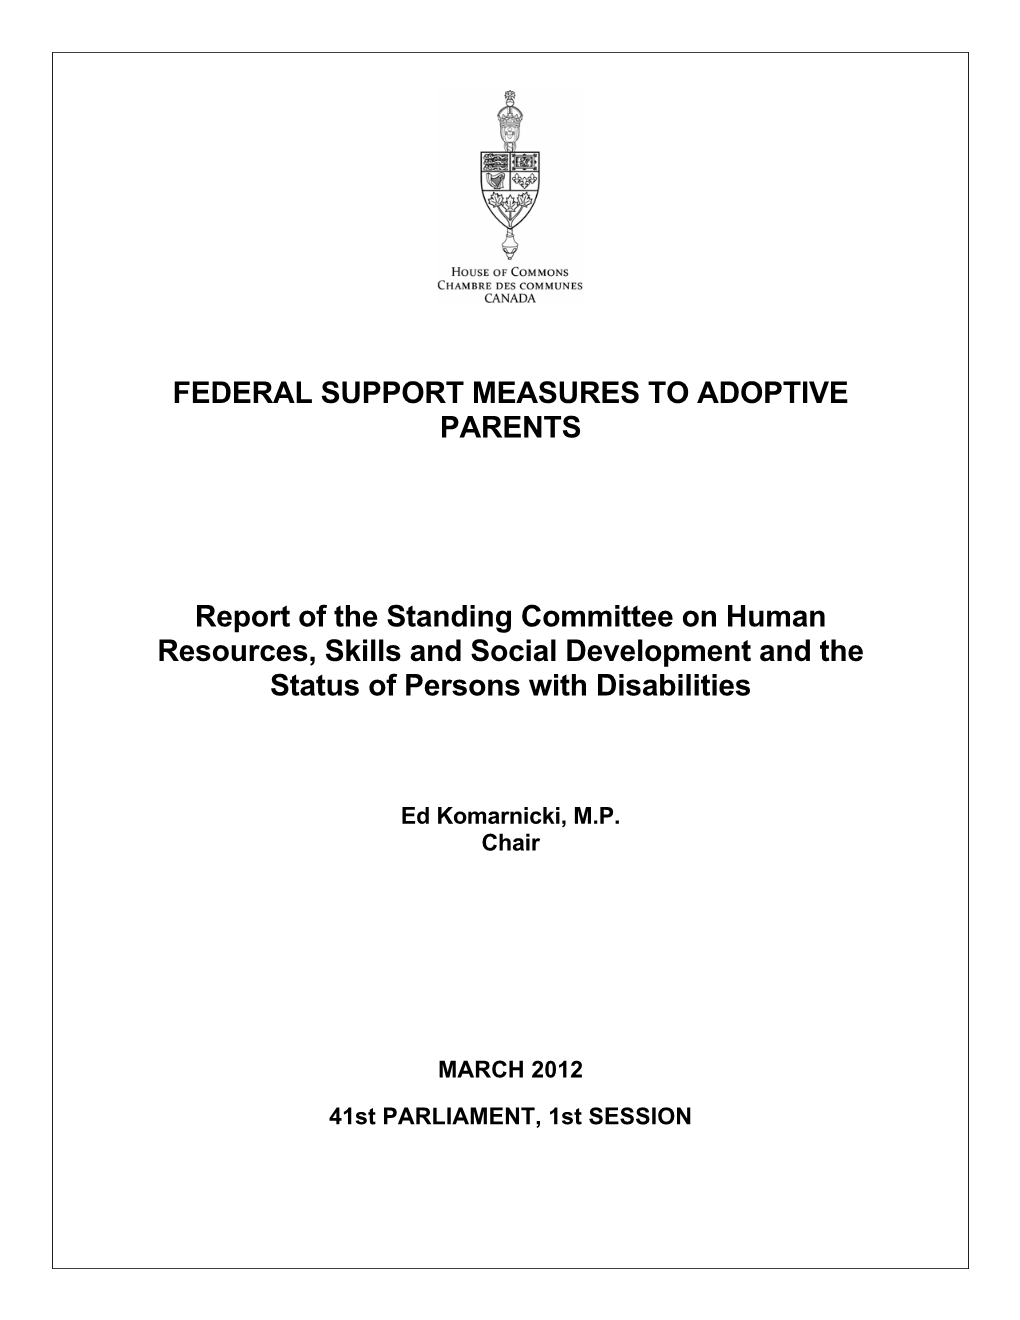 Federal Support Measures to Adoptive Parents